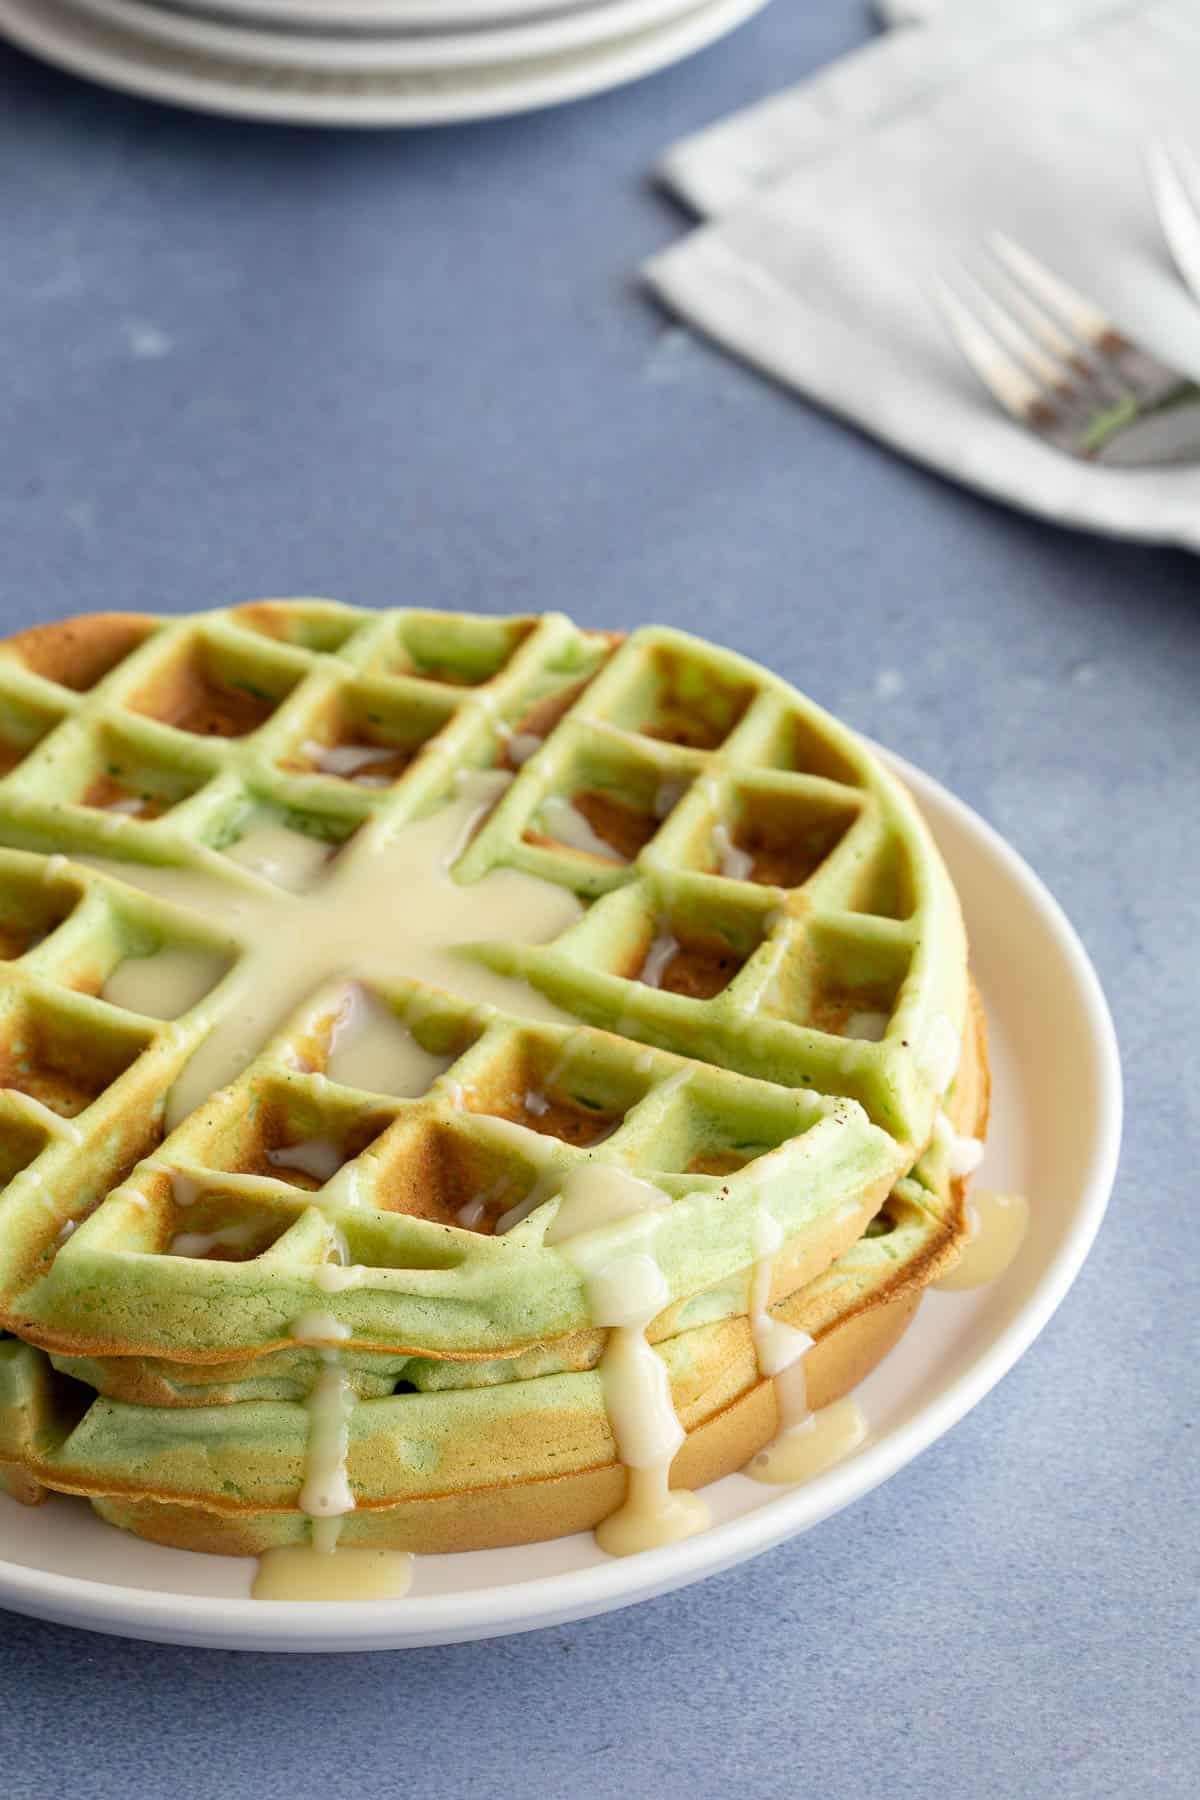 Stack of green waffles drizzled with sweetened condensed milk.